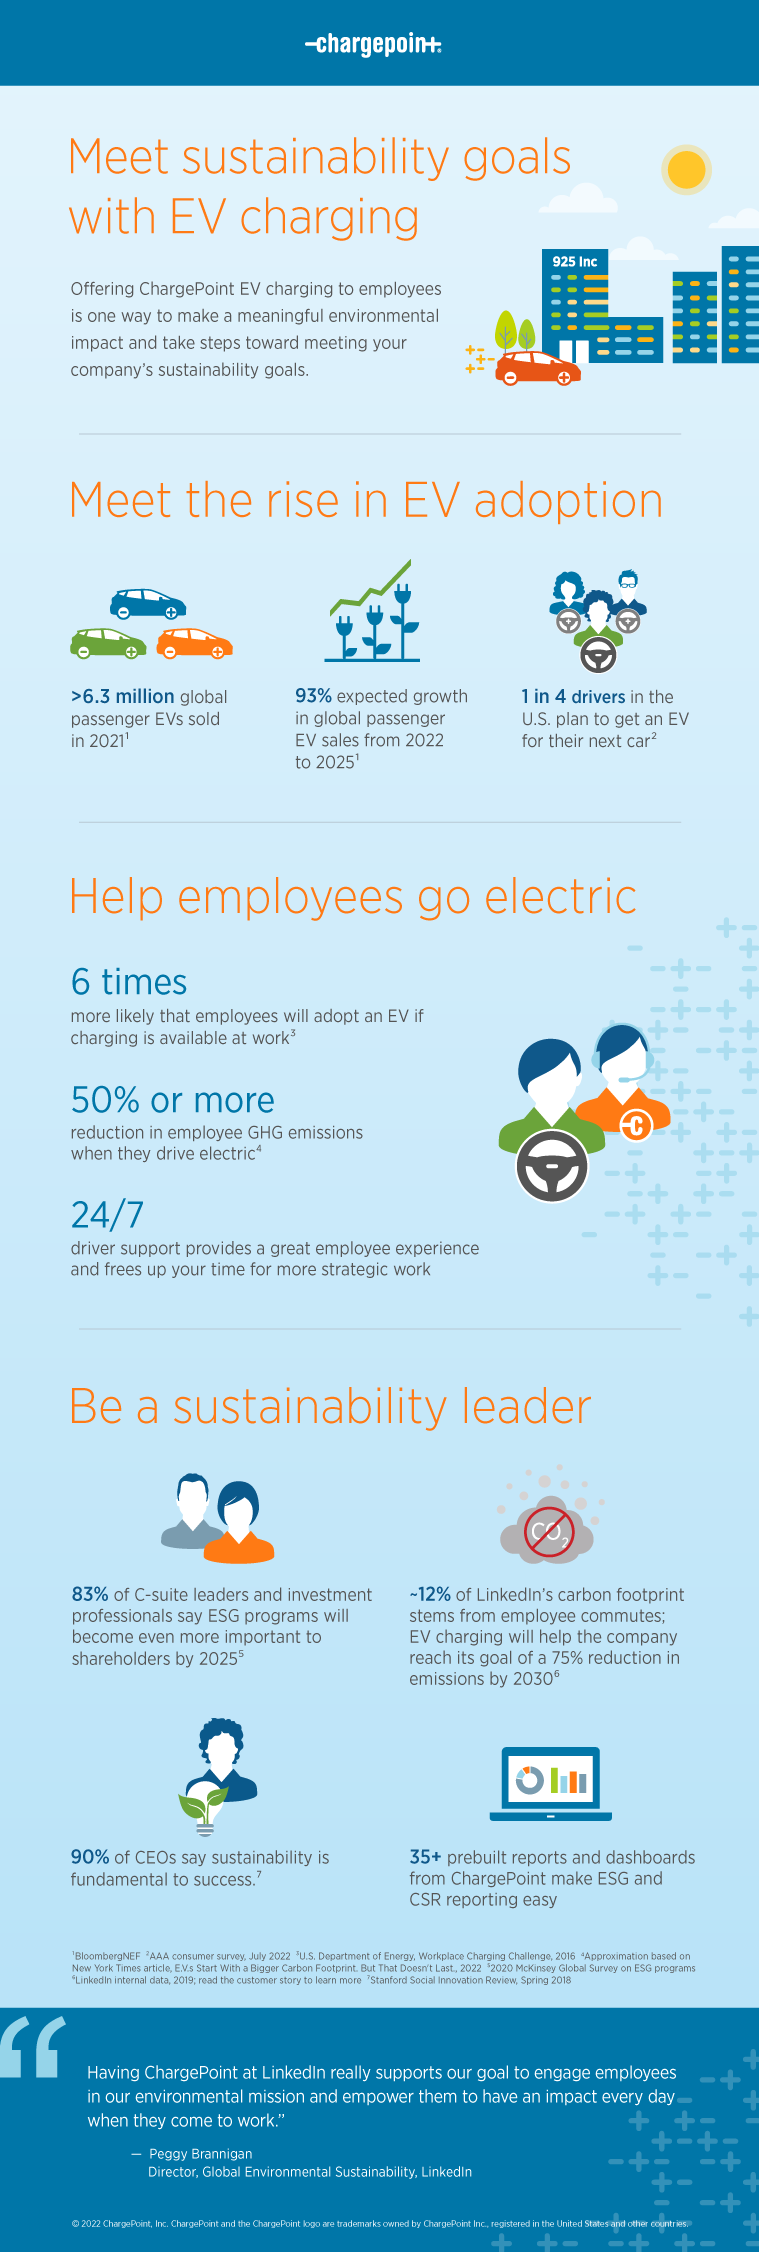 Meet sustainability goals with EV charging infographic